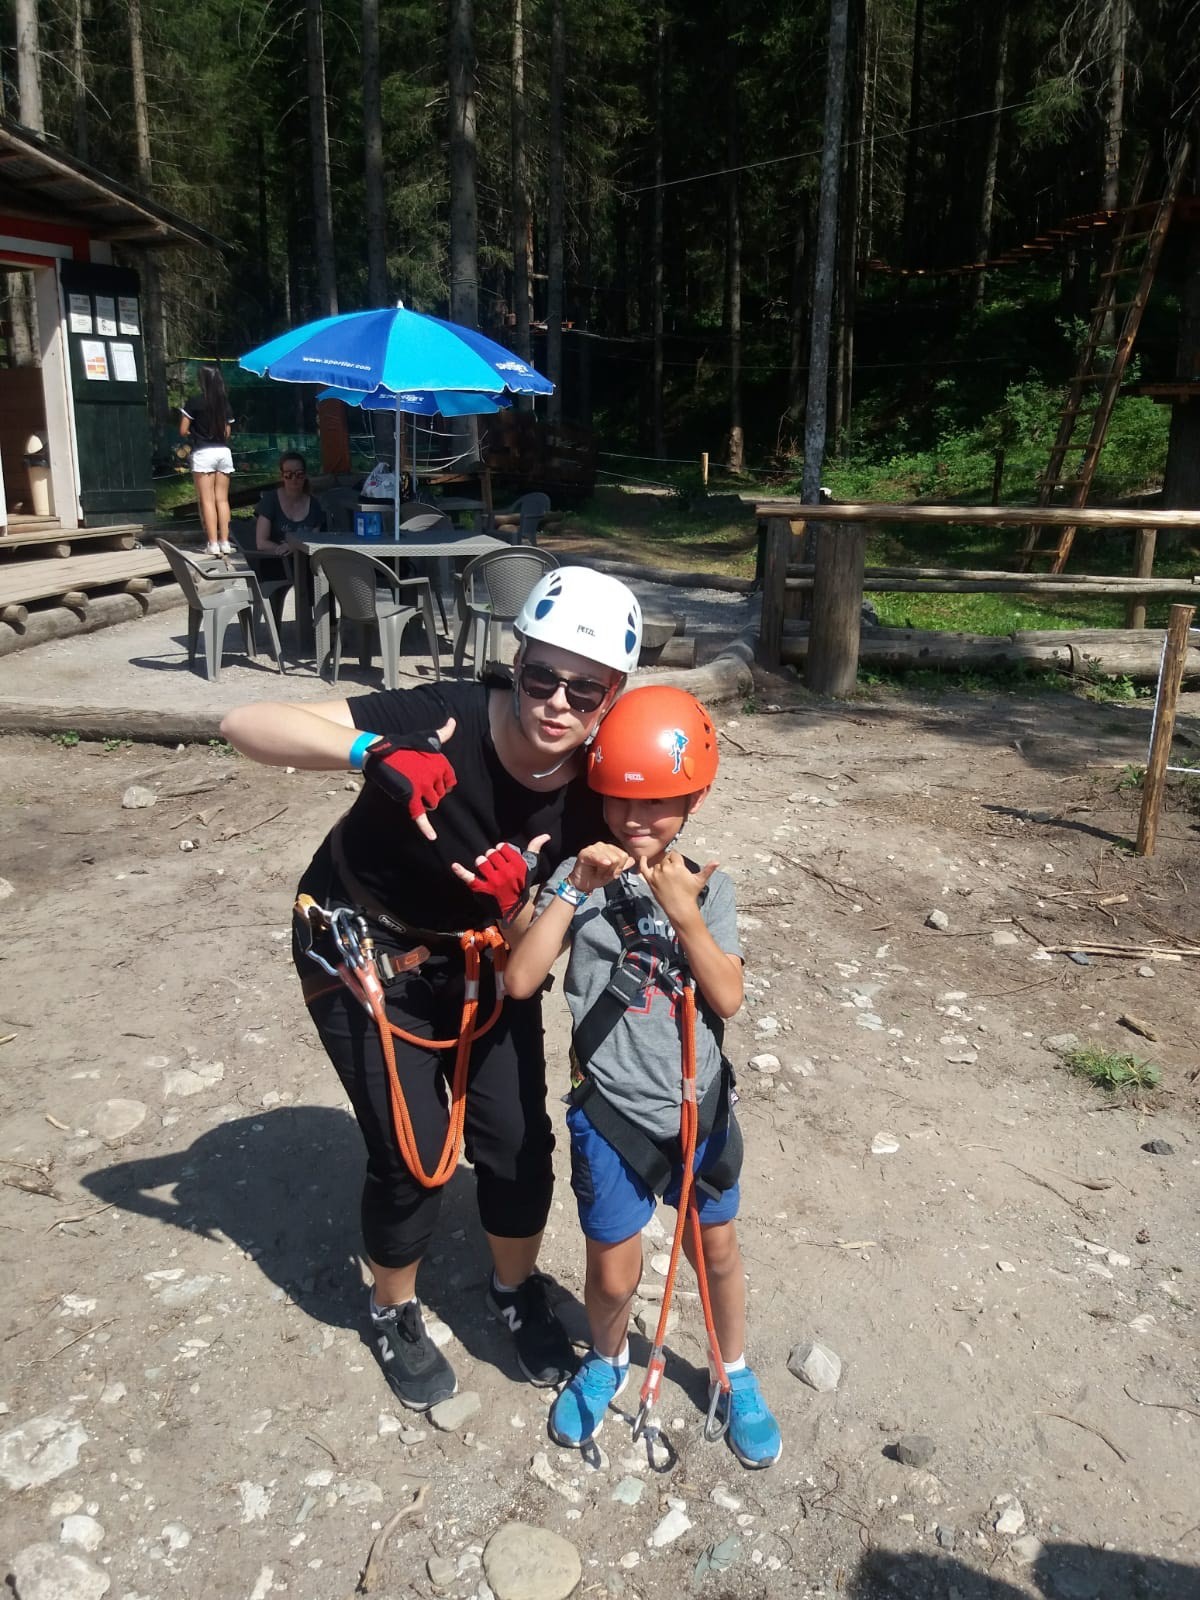 The author, a young woman, poses with a young boy while both wear climbing gear.